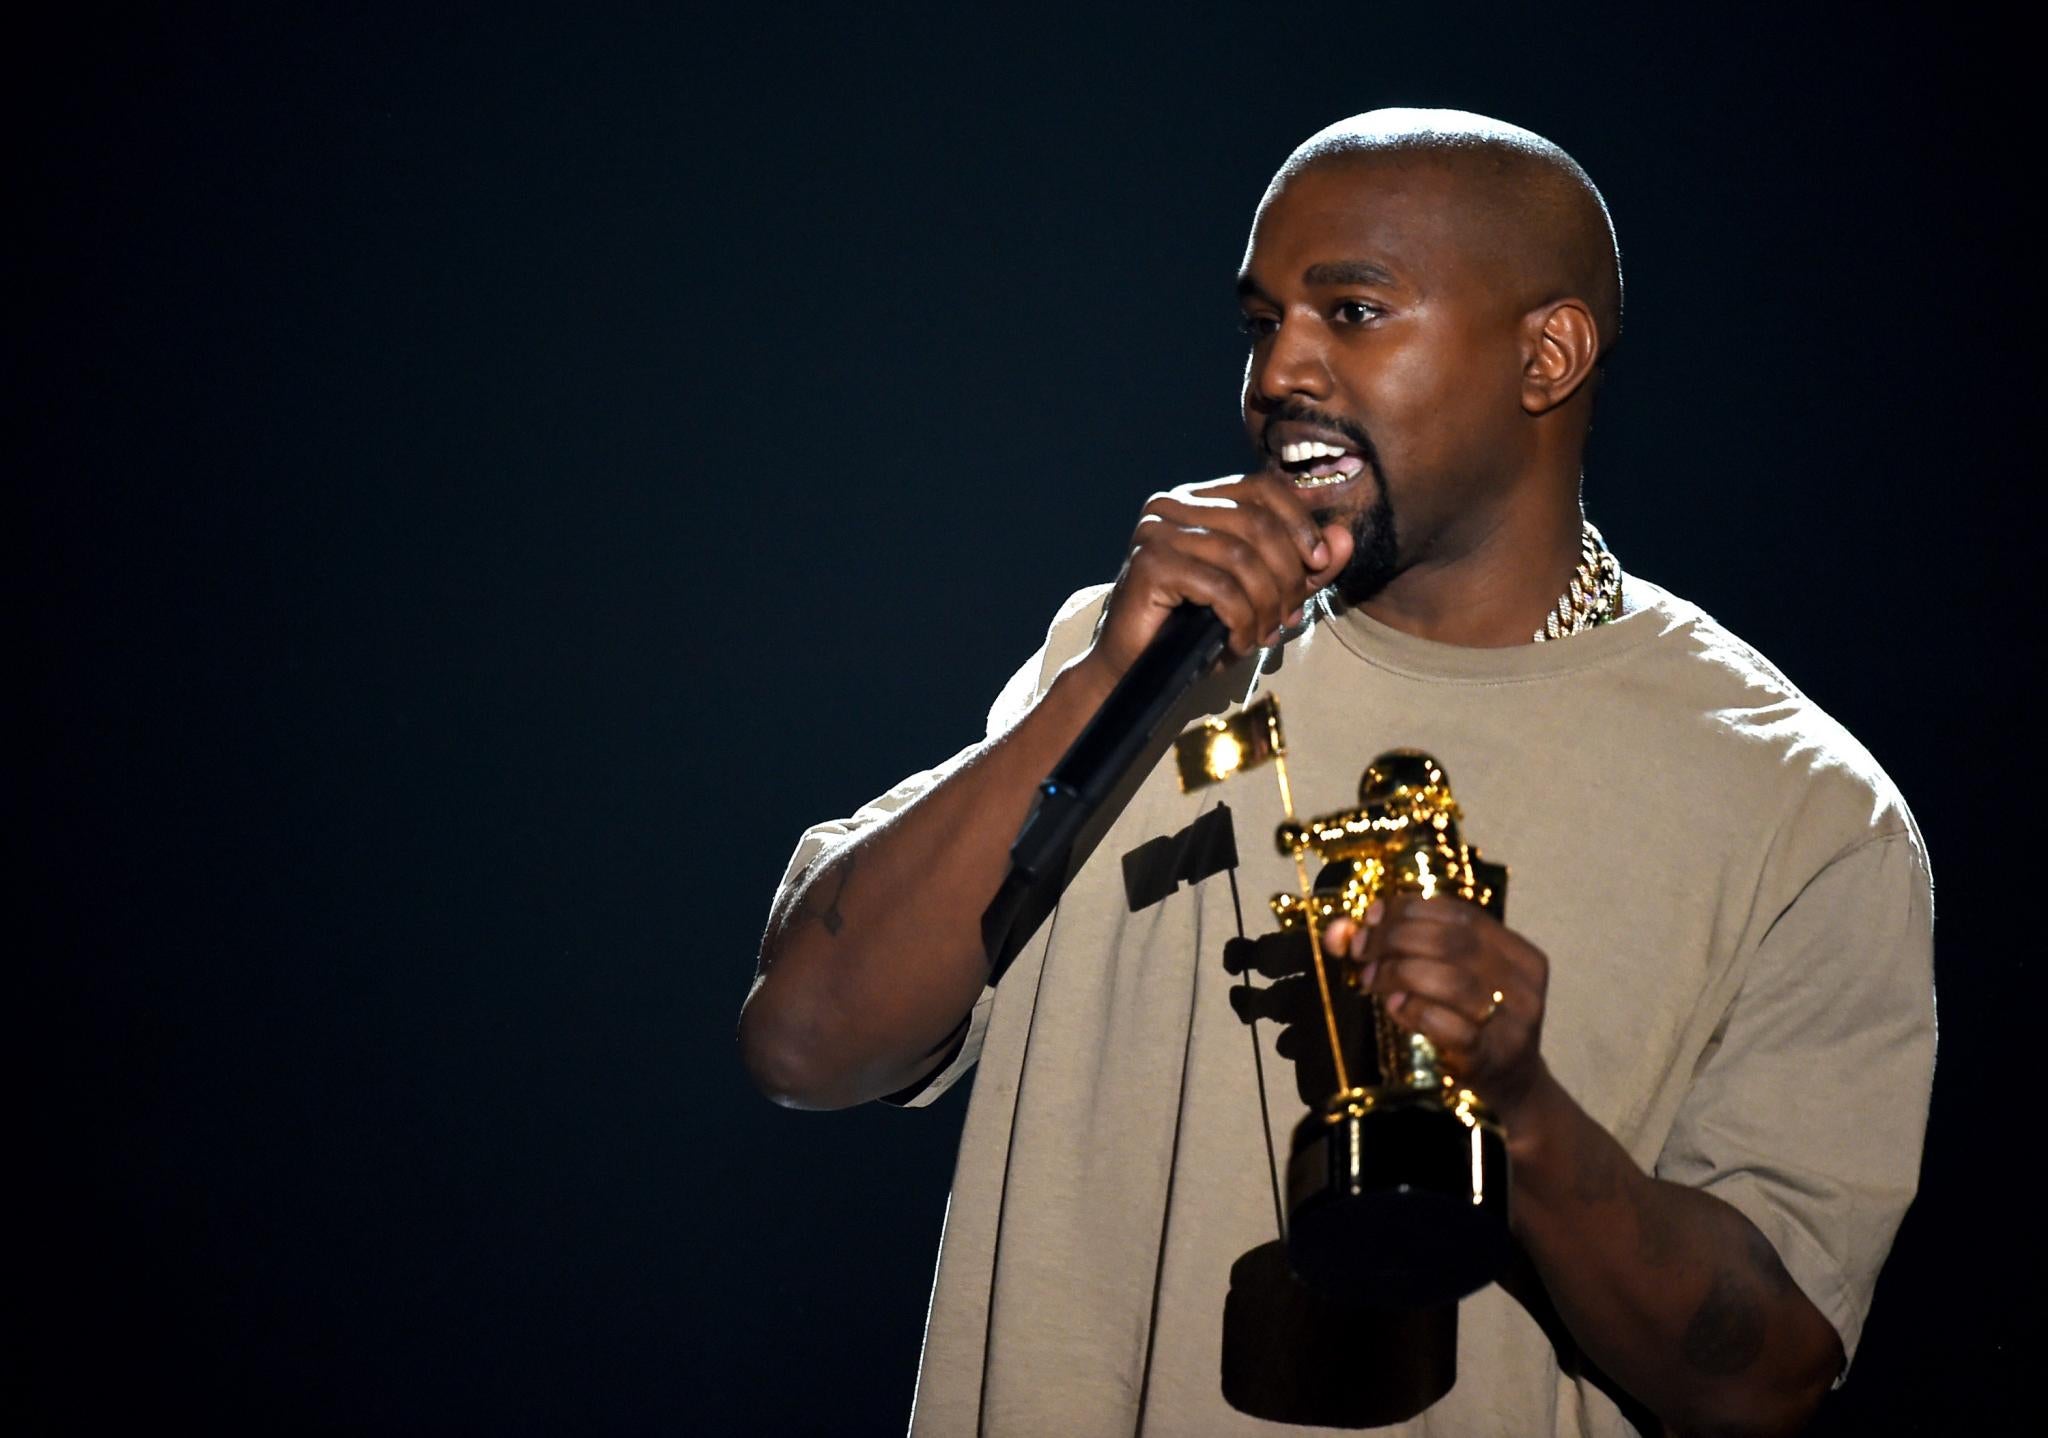 Relive the 2015 MTV Video Music Awards
